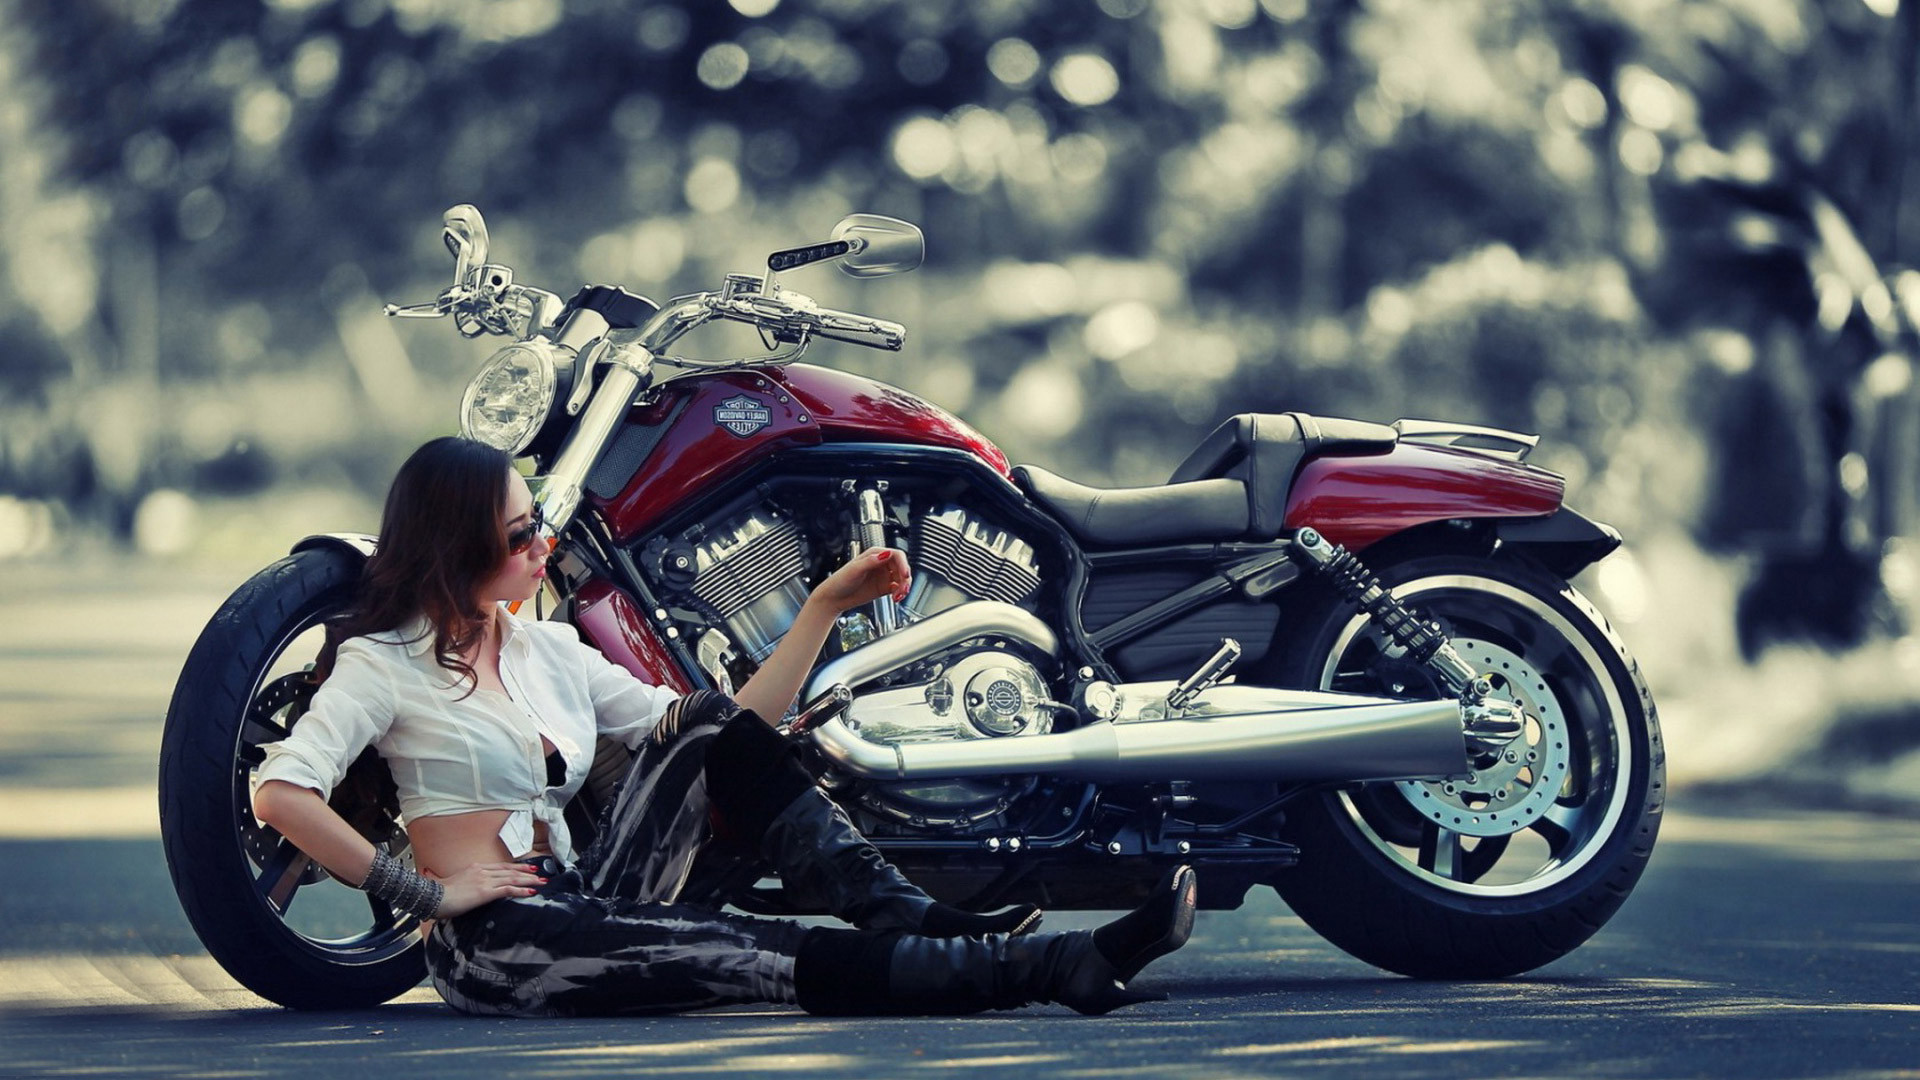 Harley Davidson Wallpapers Collection (33+)